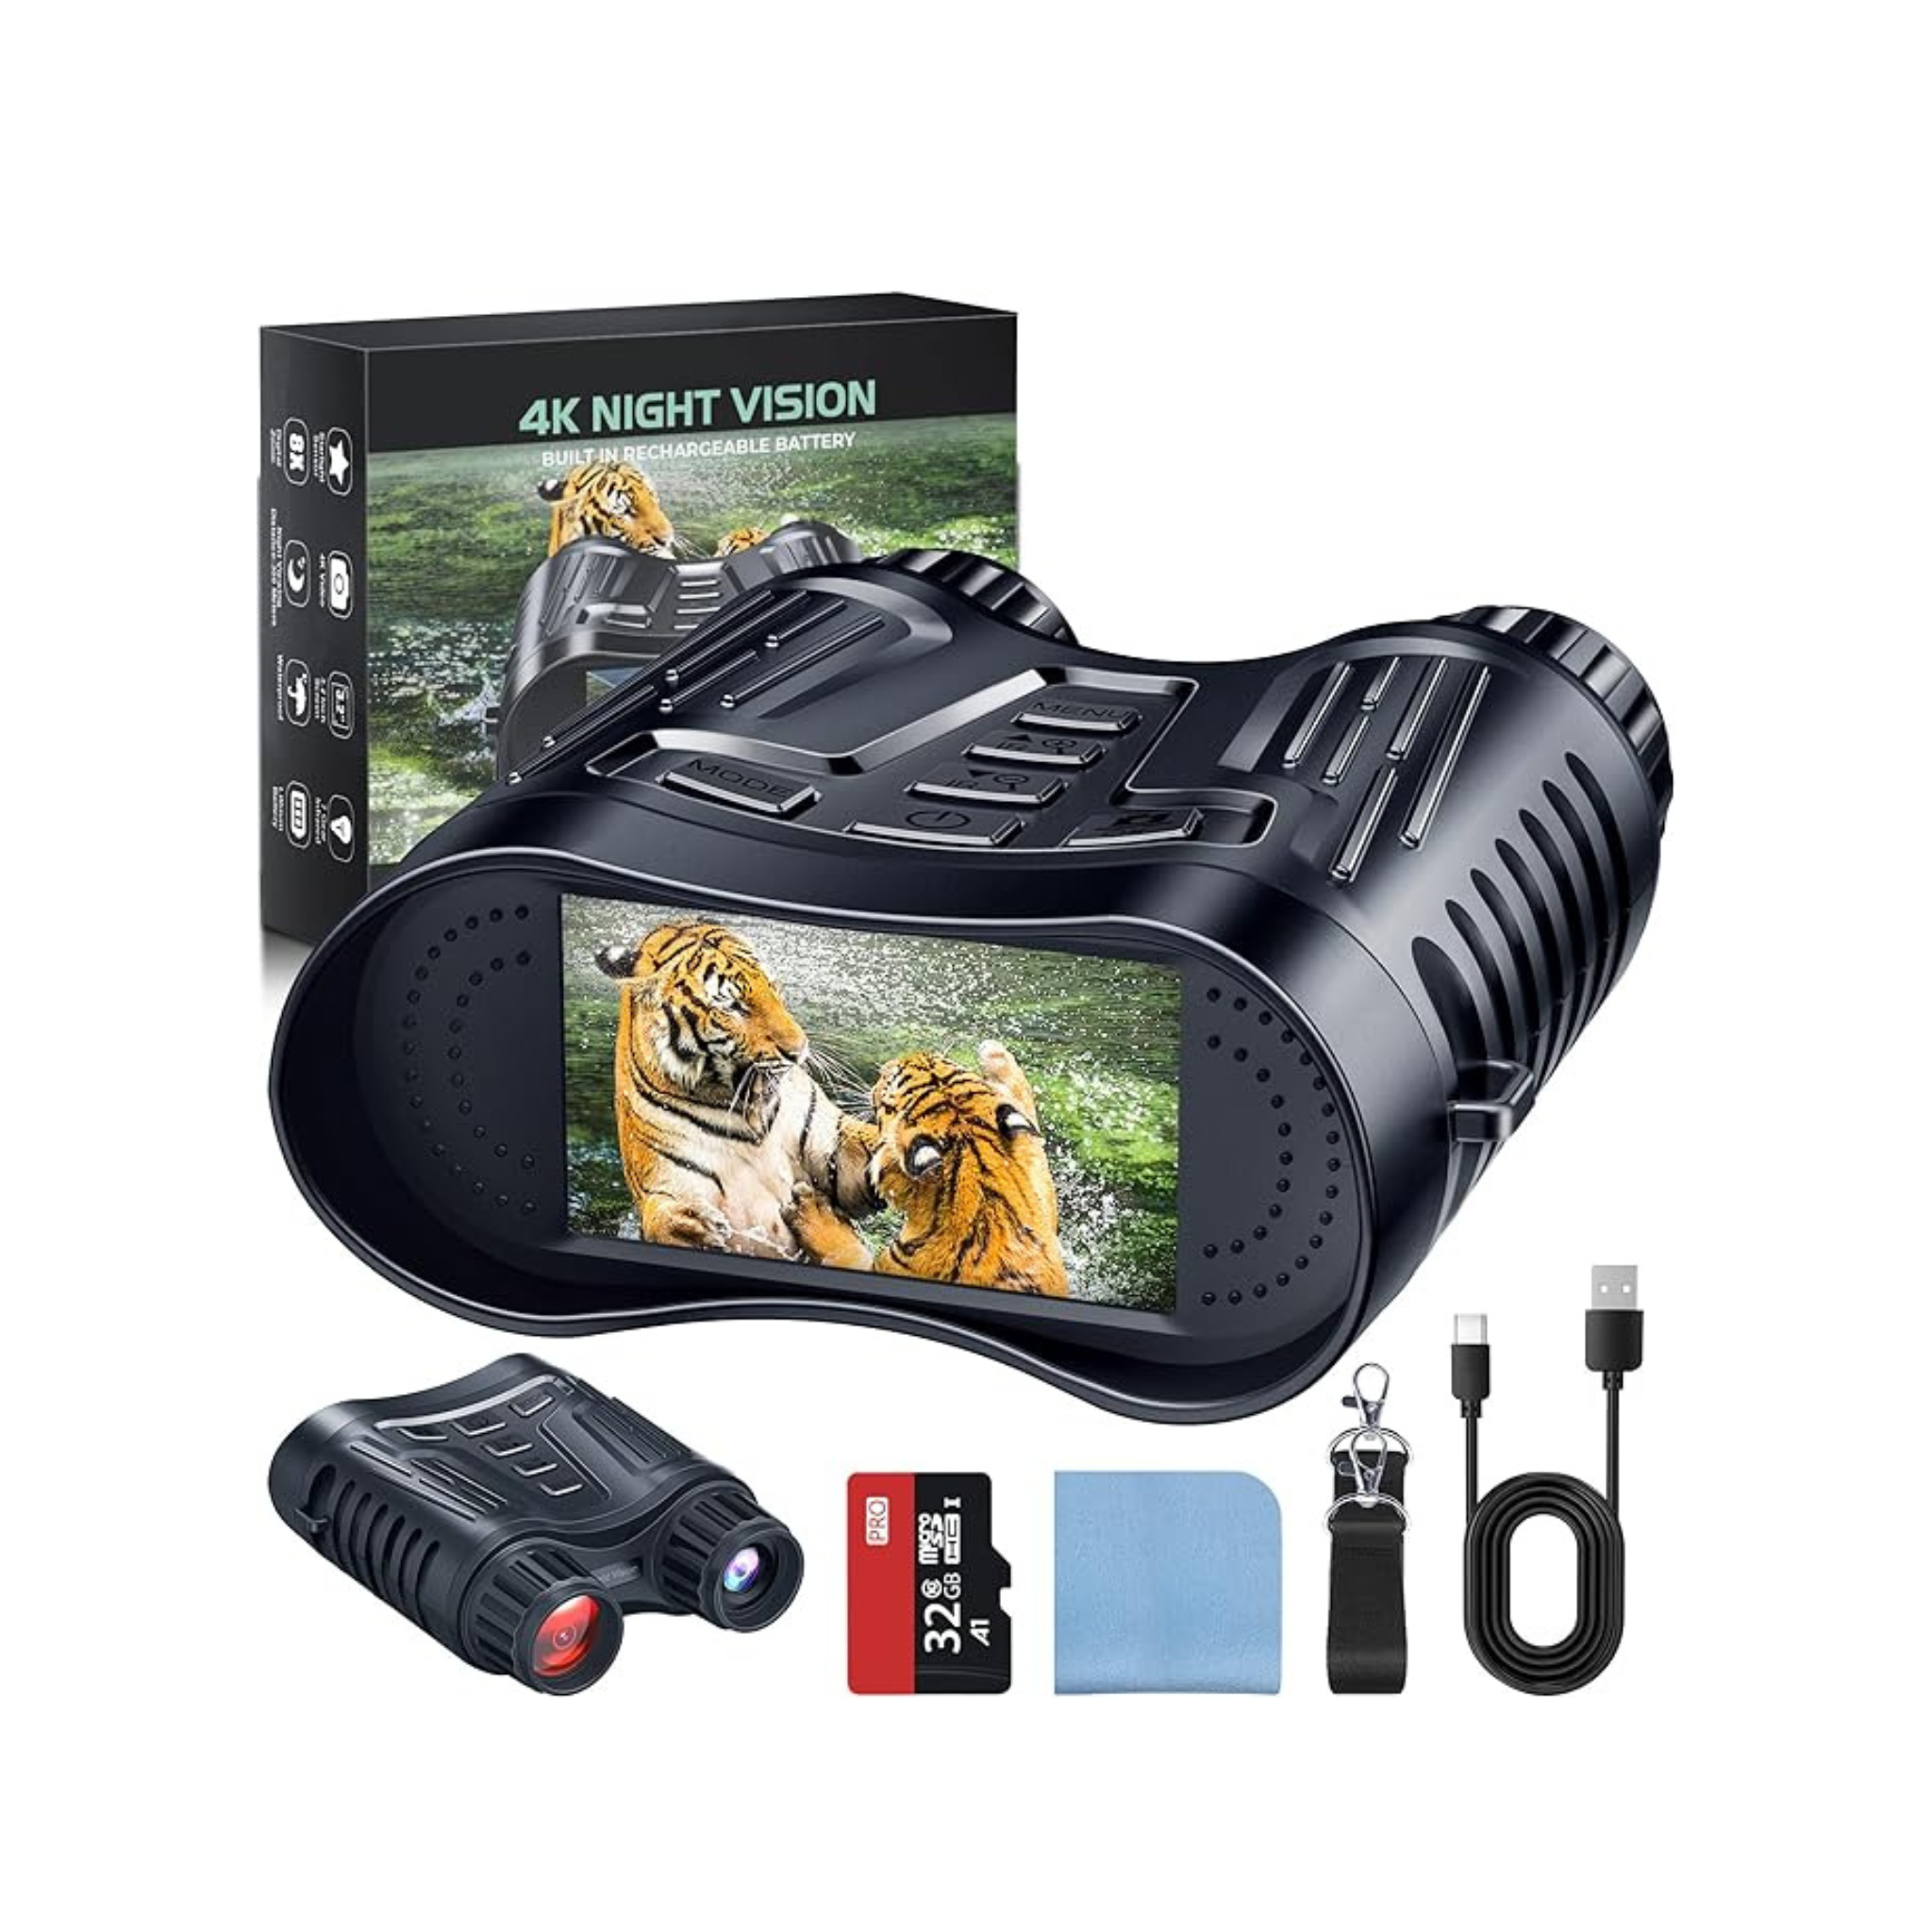 4K Night Vision Goggles with 3.2” Large Screen, 8X Digital Zoom & 32GB Card